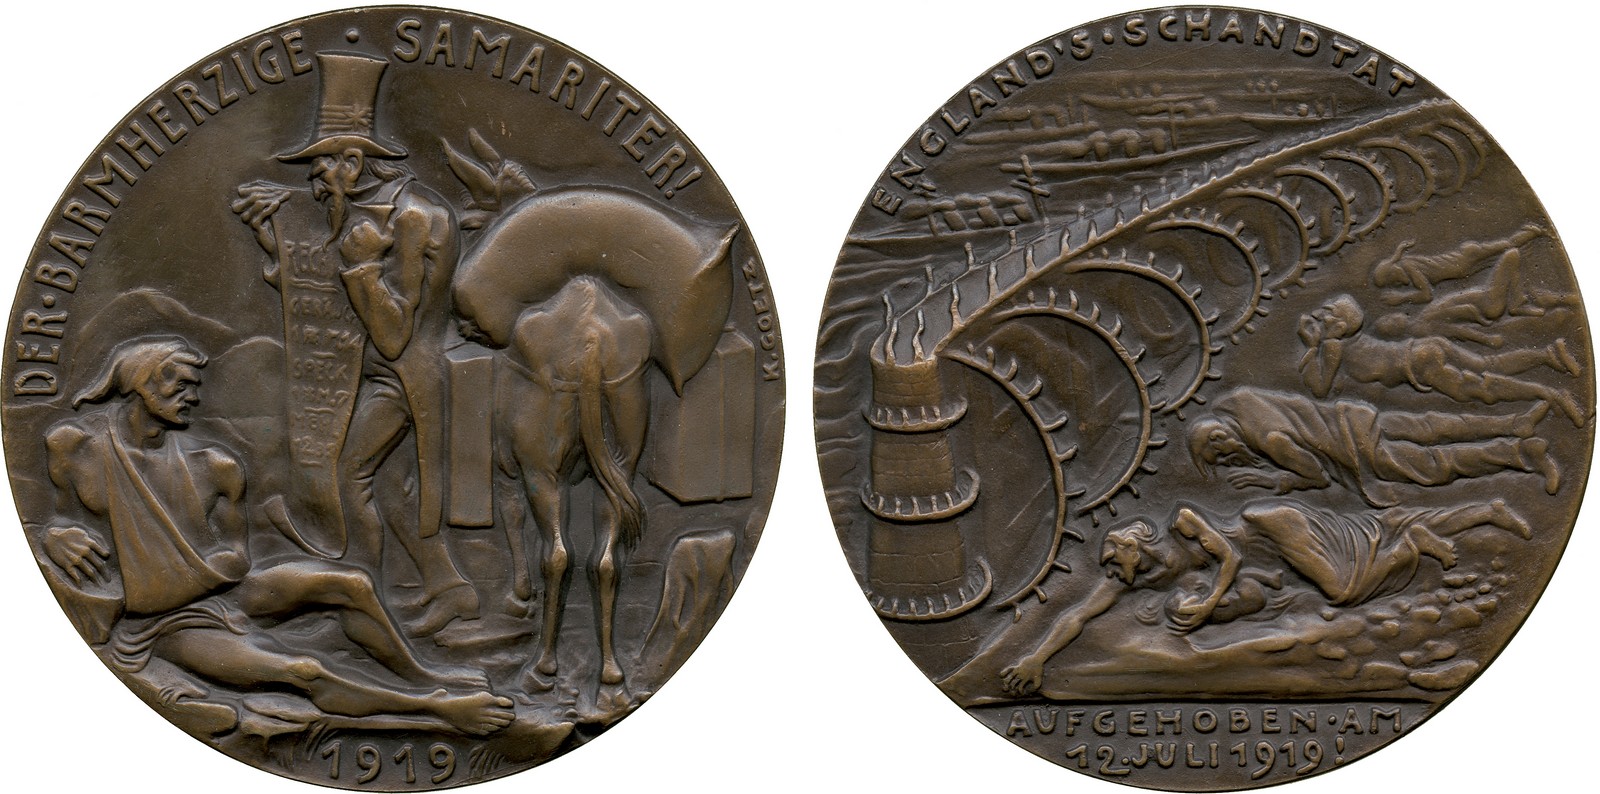 COMMEMORATIVE MEDALS, WORLD MEDALS, Medals of the Axis, Germany, Germany, The Good Samaritan -